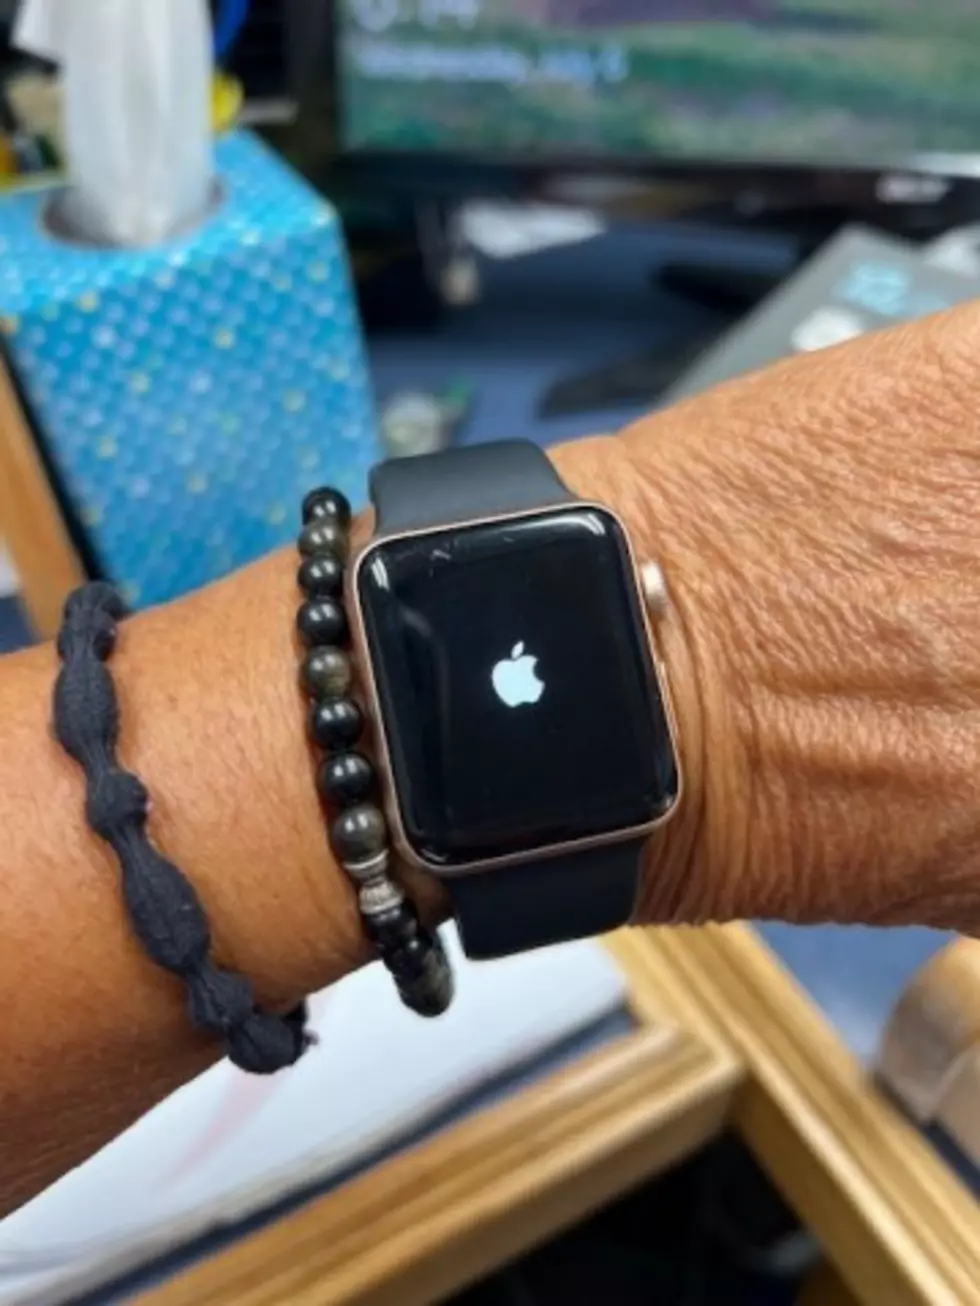 5 Apple Watch Hacks that will Definitely NOT Work! Prove Me Wrong!